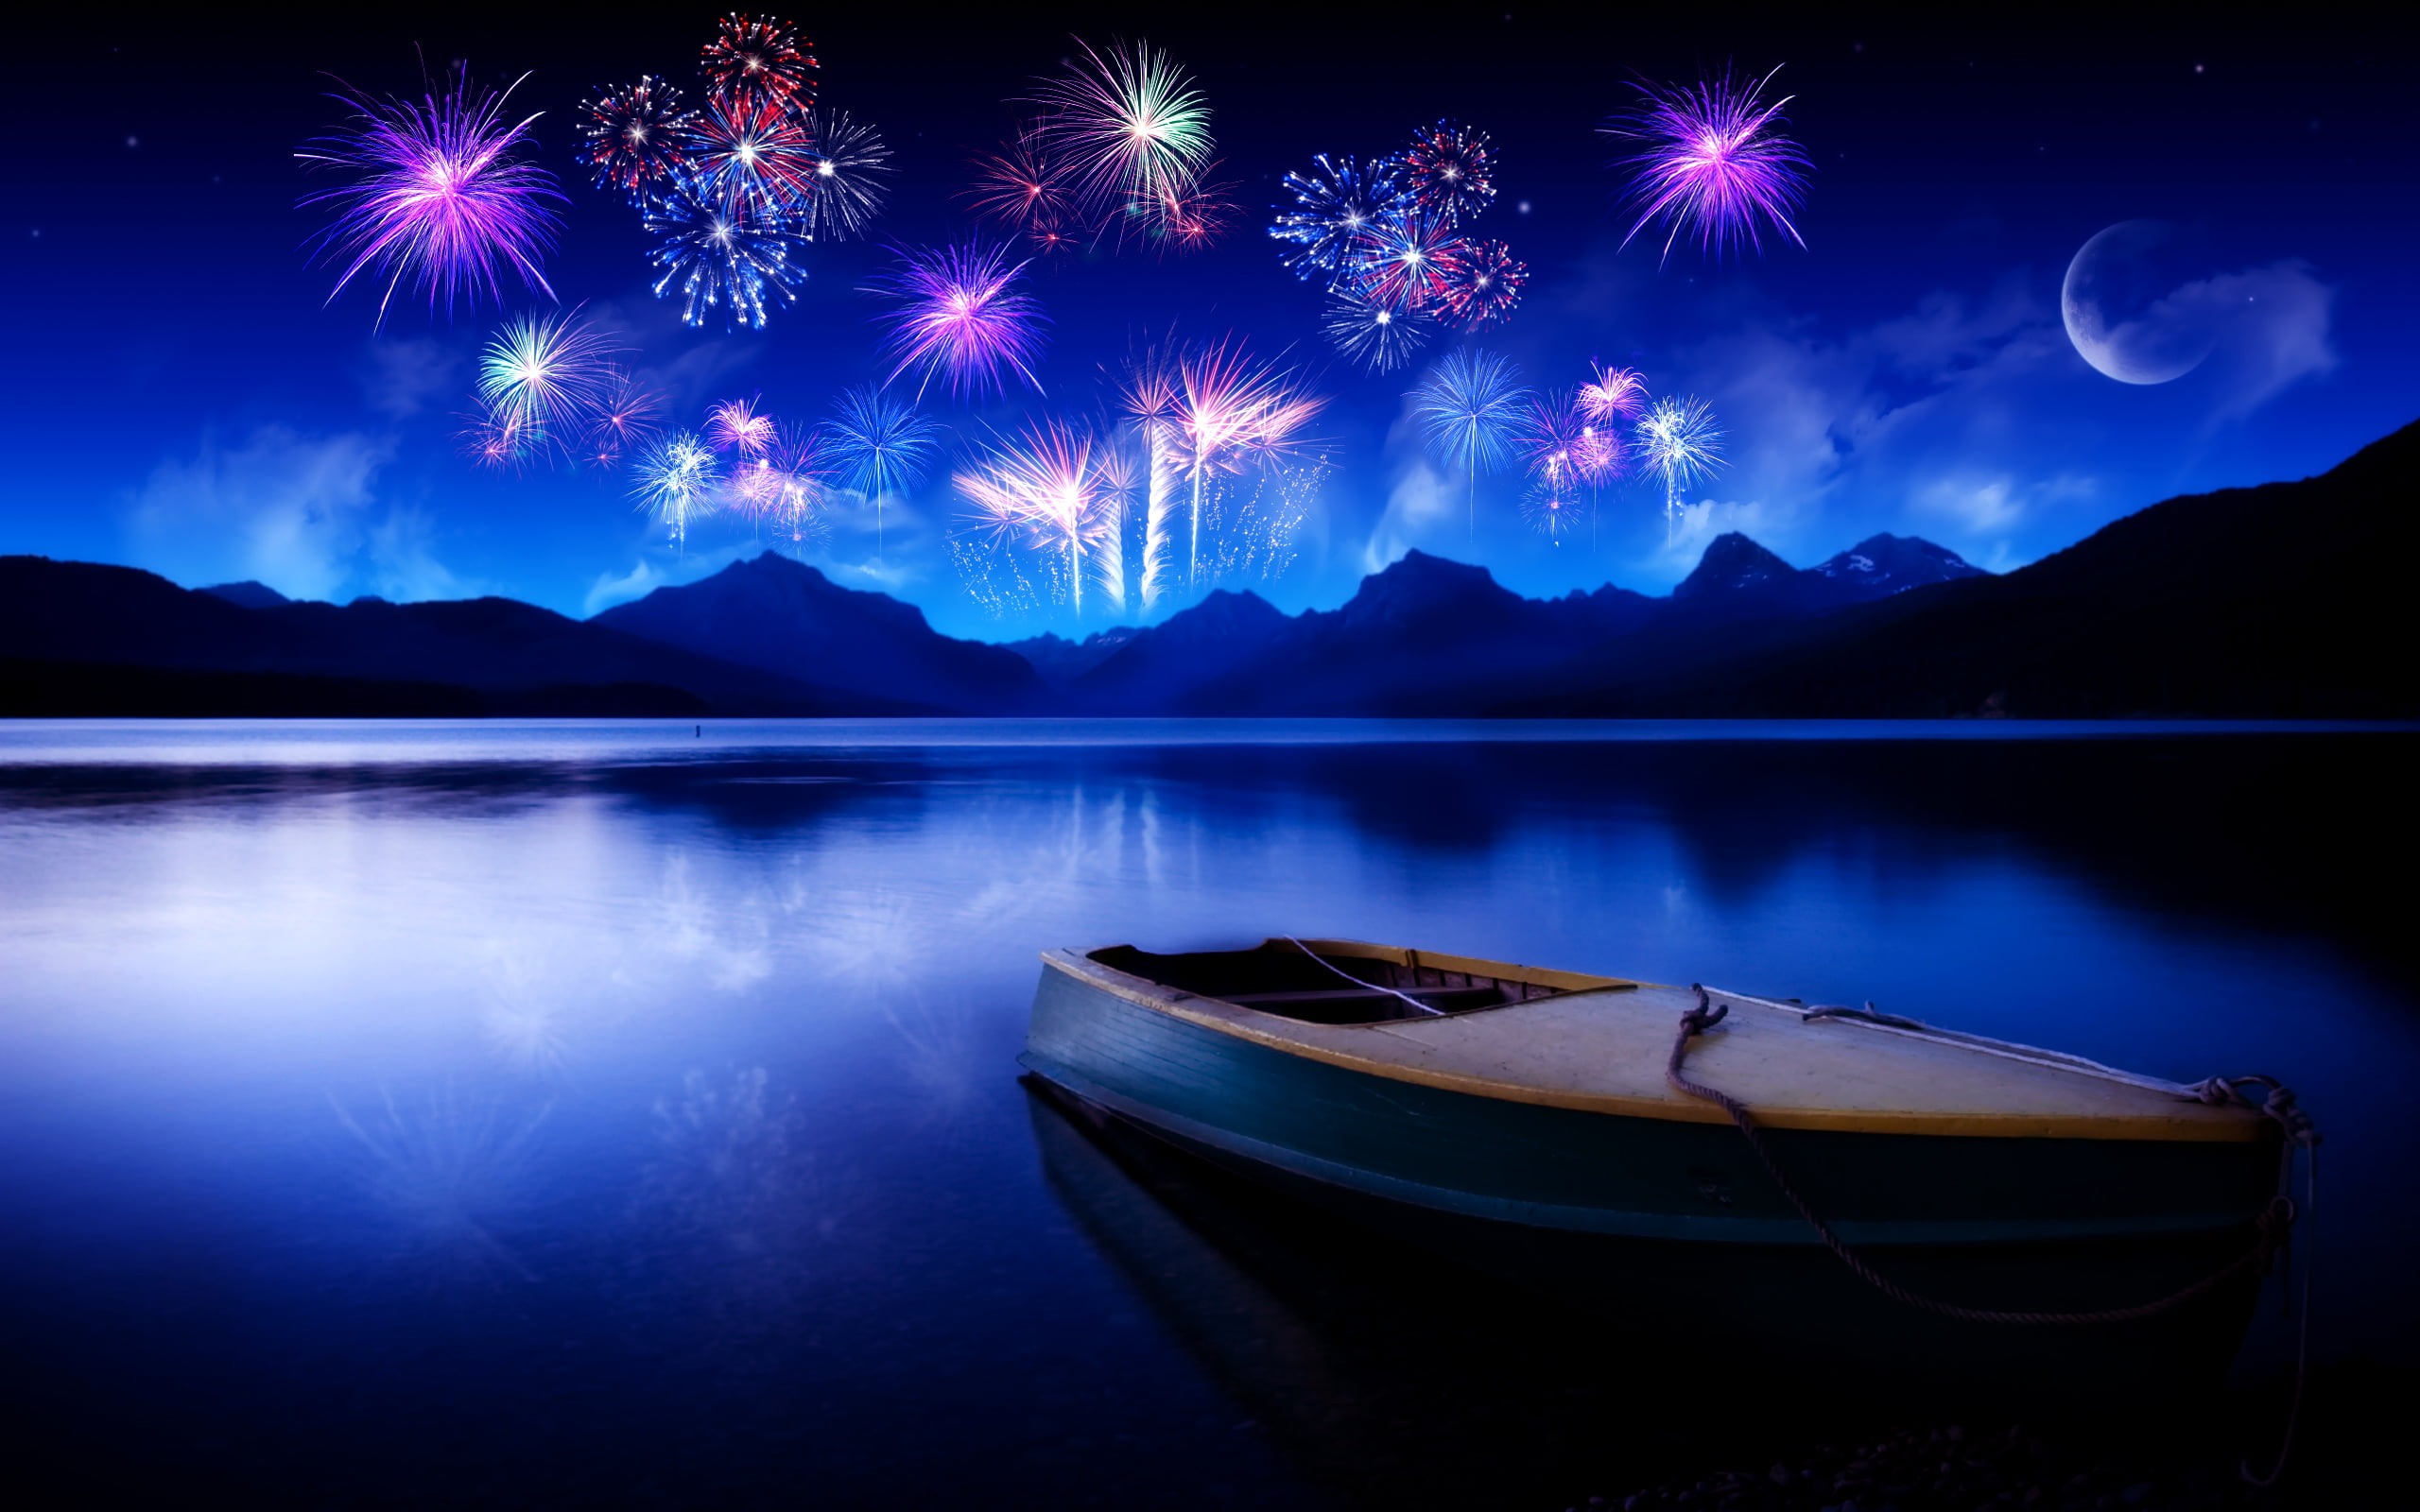 Brown Rowboat On Sea With Fireworks HD Wallpaper